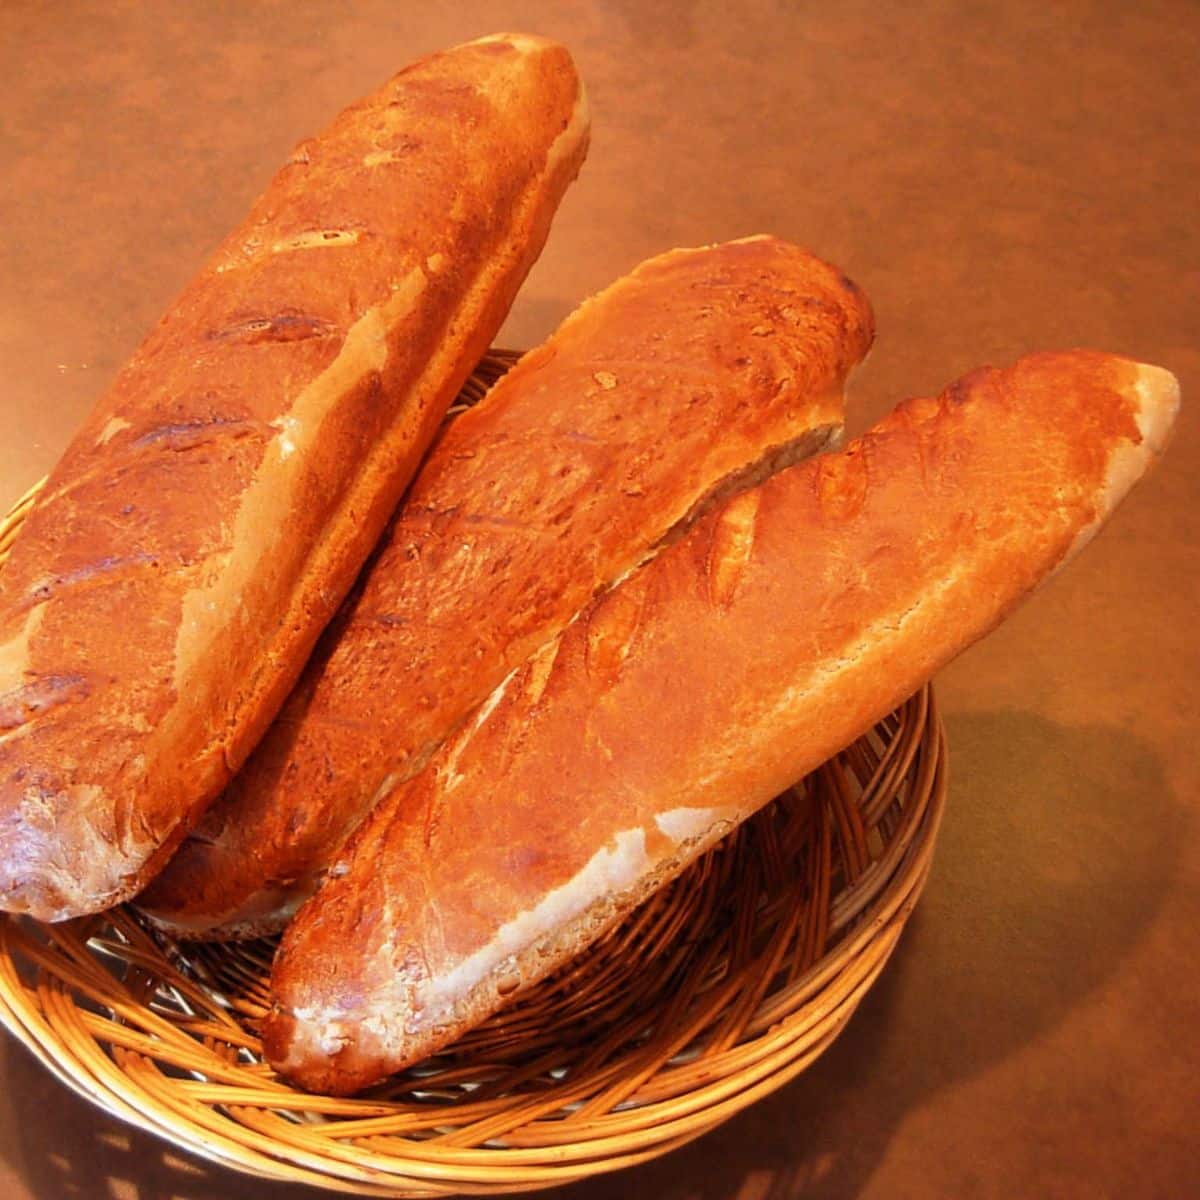 Three loaves of French bread in a basket.